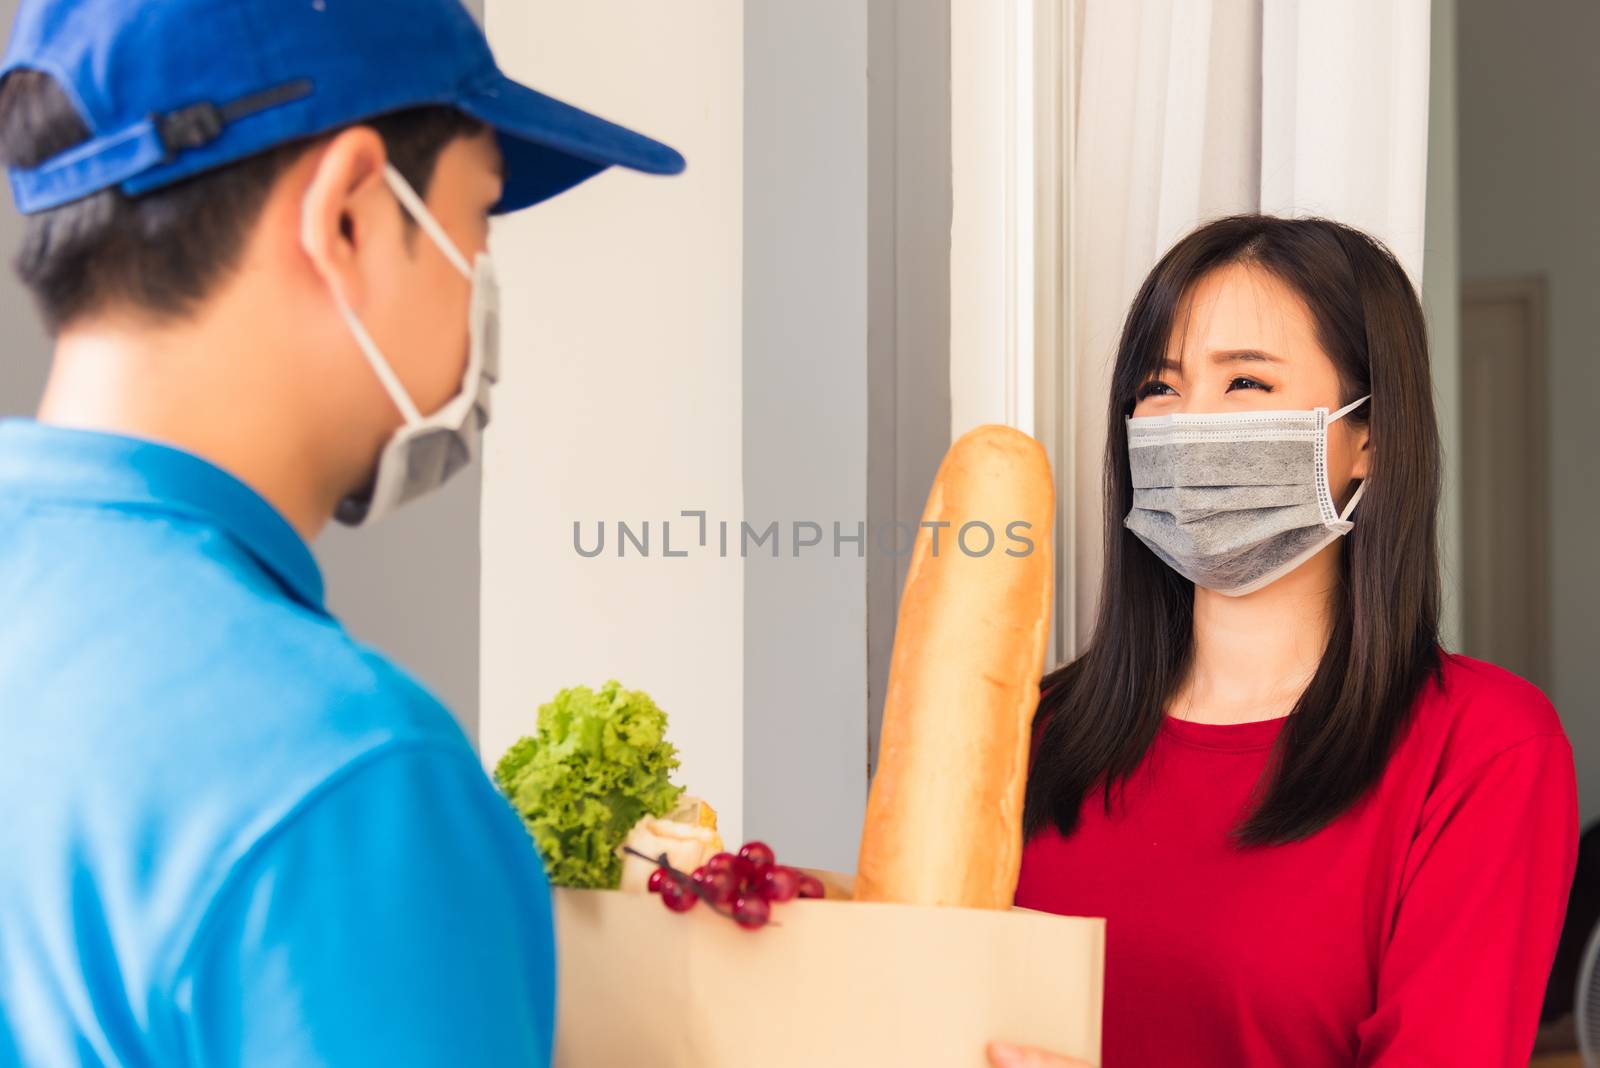 Delivery man wear protective face mask making grocery giving fre by Sorapop